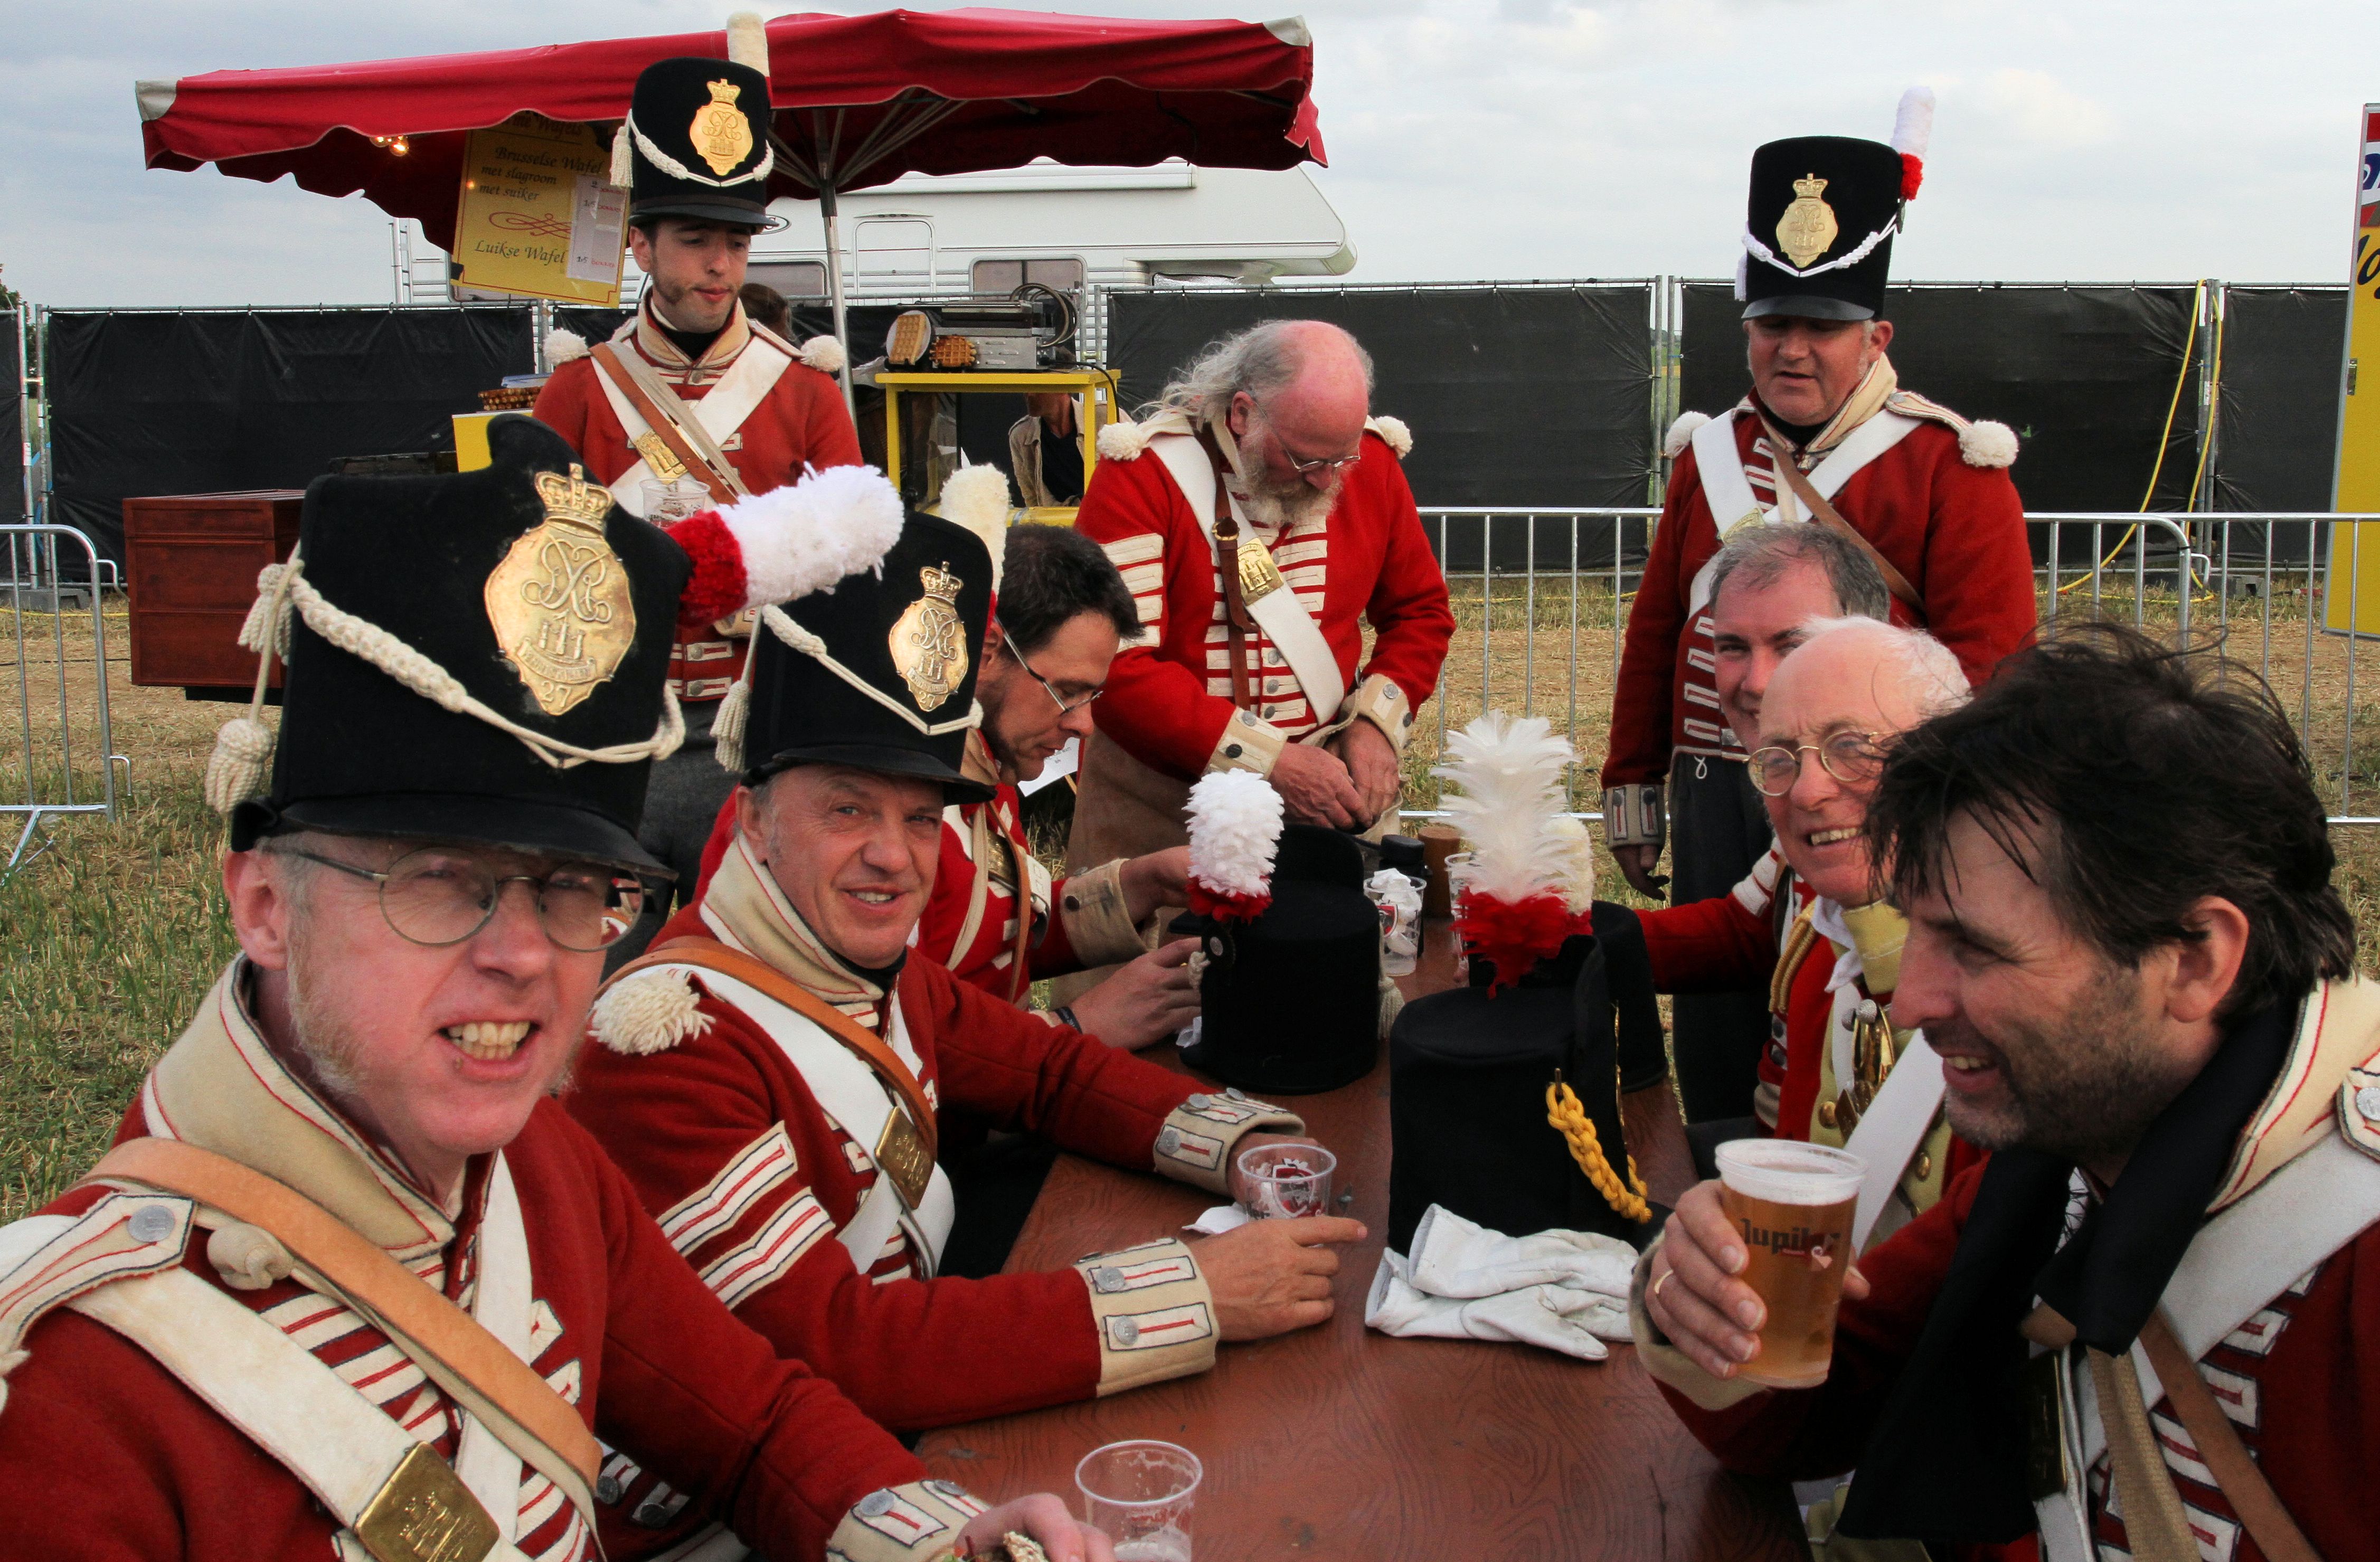 Pictures at Re-enactment Battle of Waterloo 200th anniversary